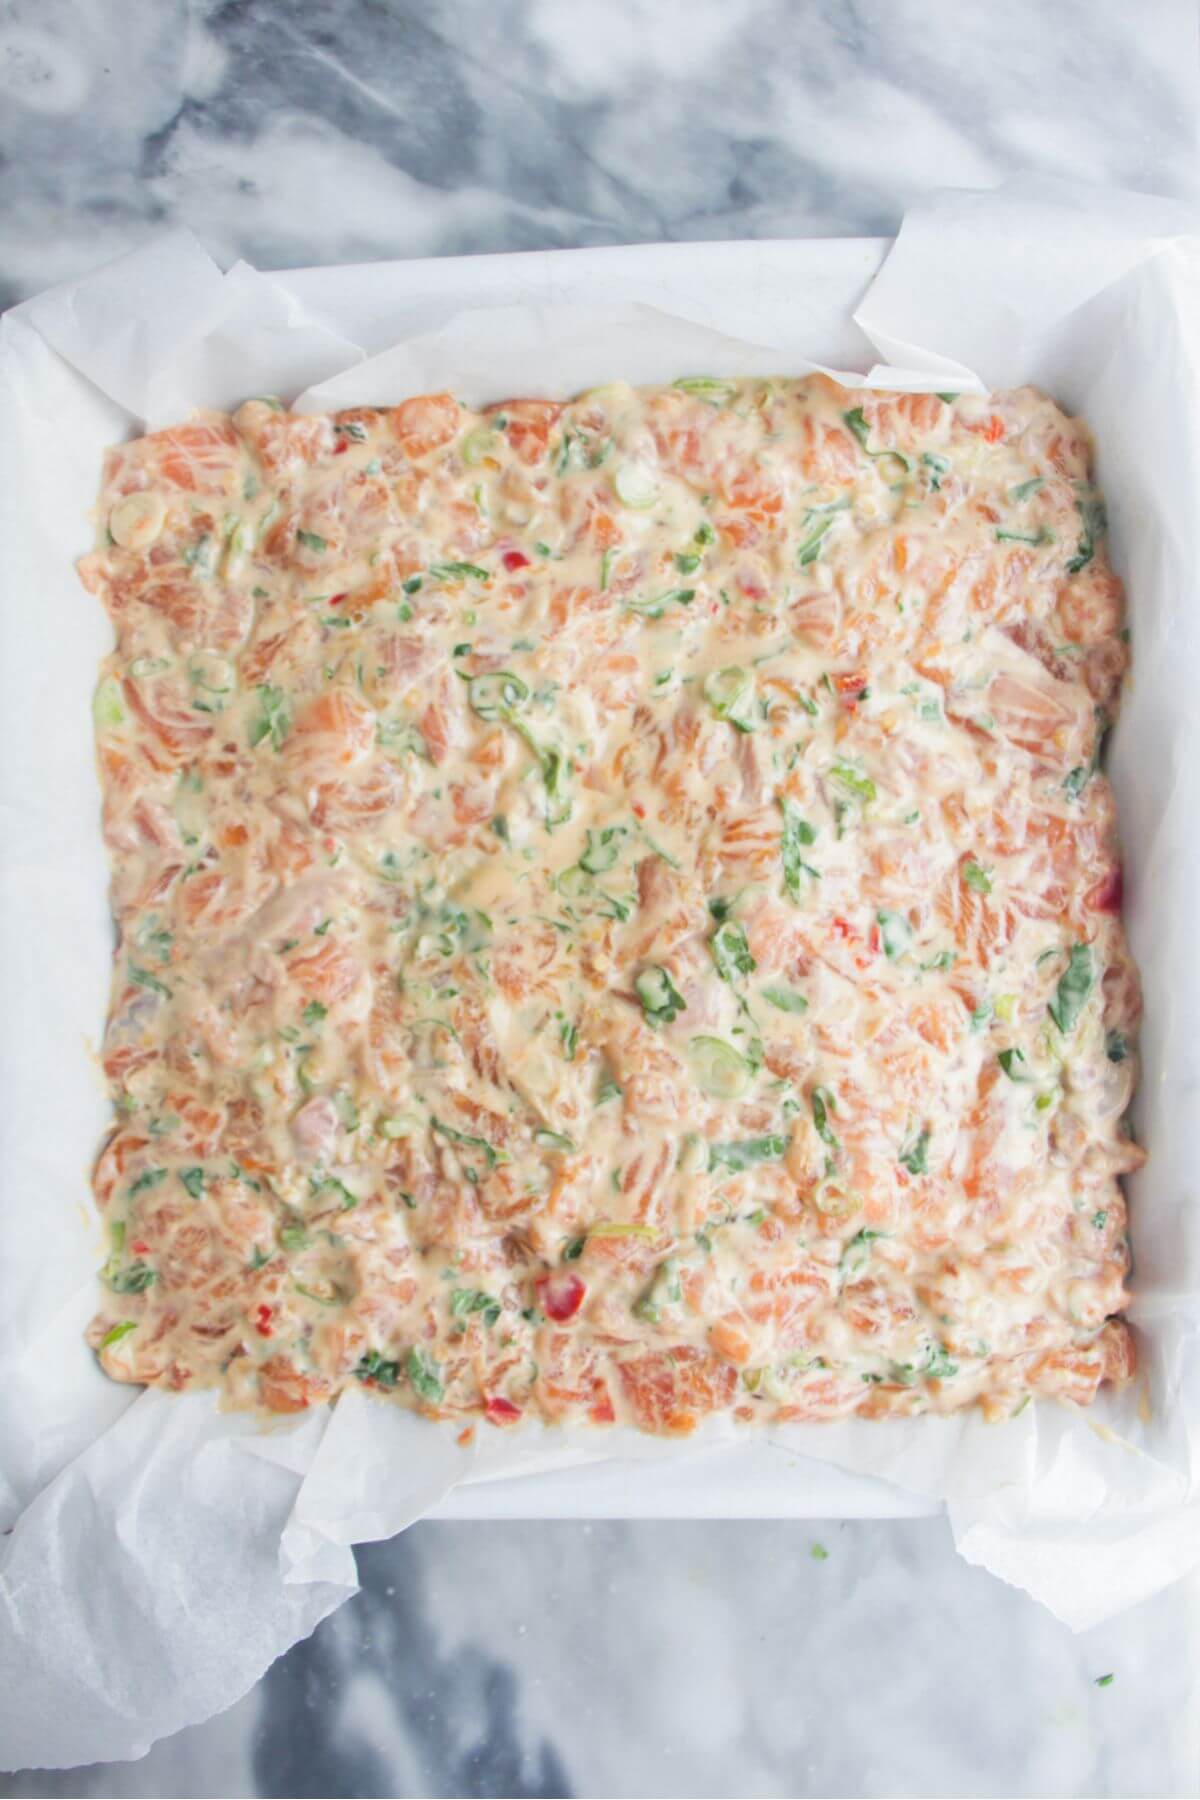 Salmon mix smoothed on top of rice in a baking paper lined square oven dish.